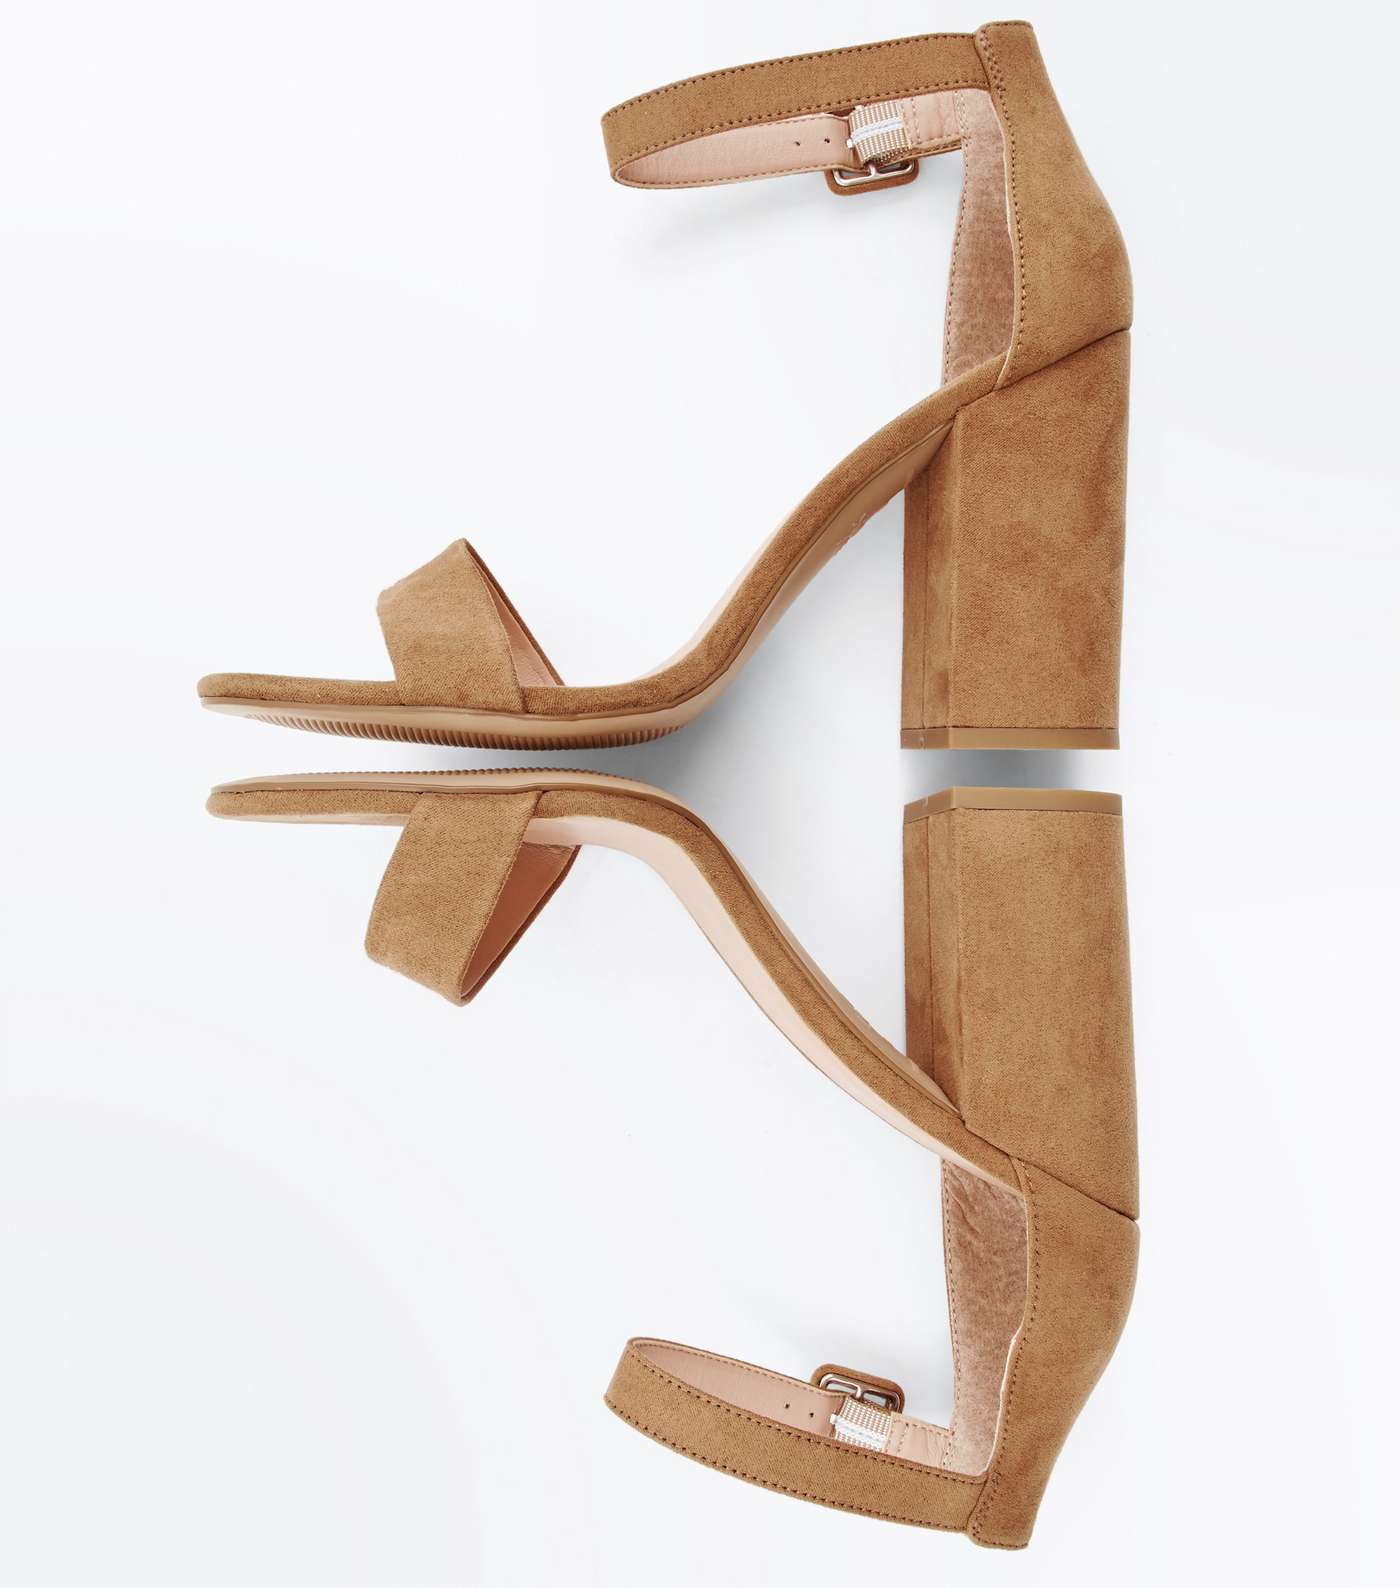 Mink Suedette Barely There Block Heels Image 3